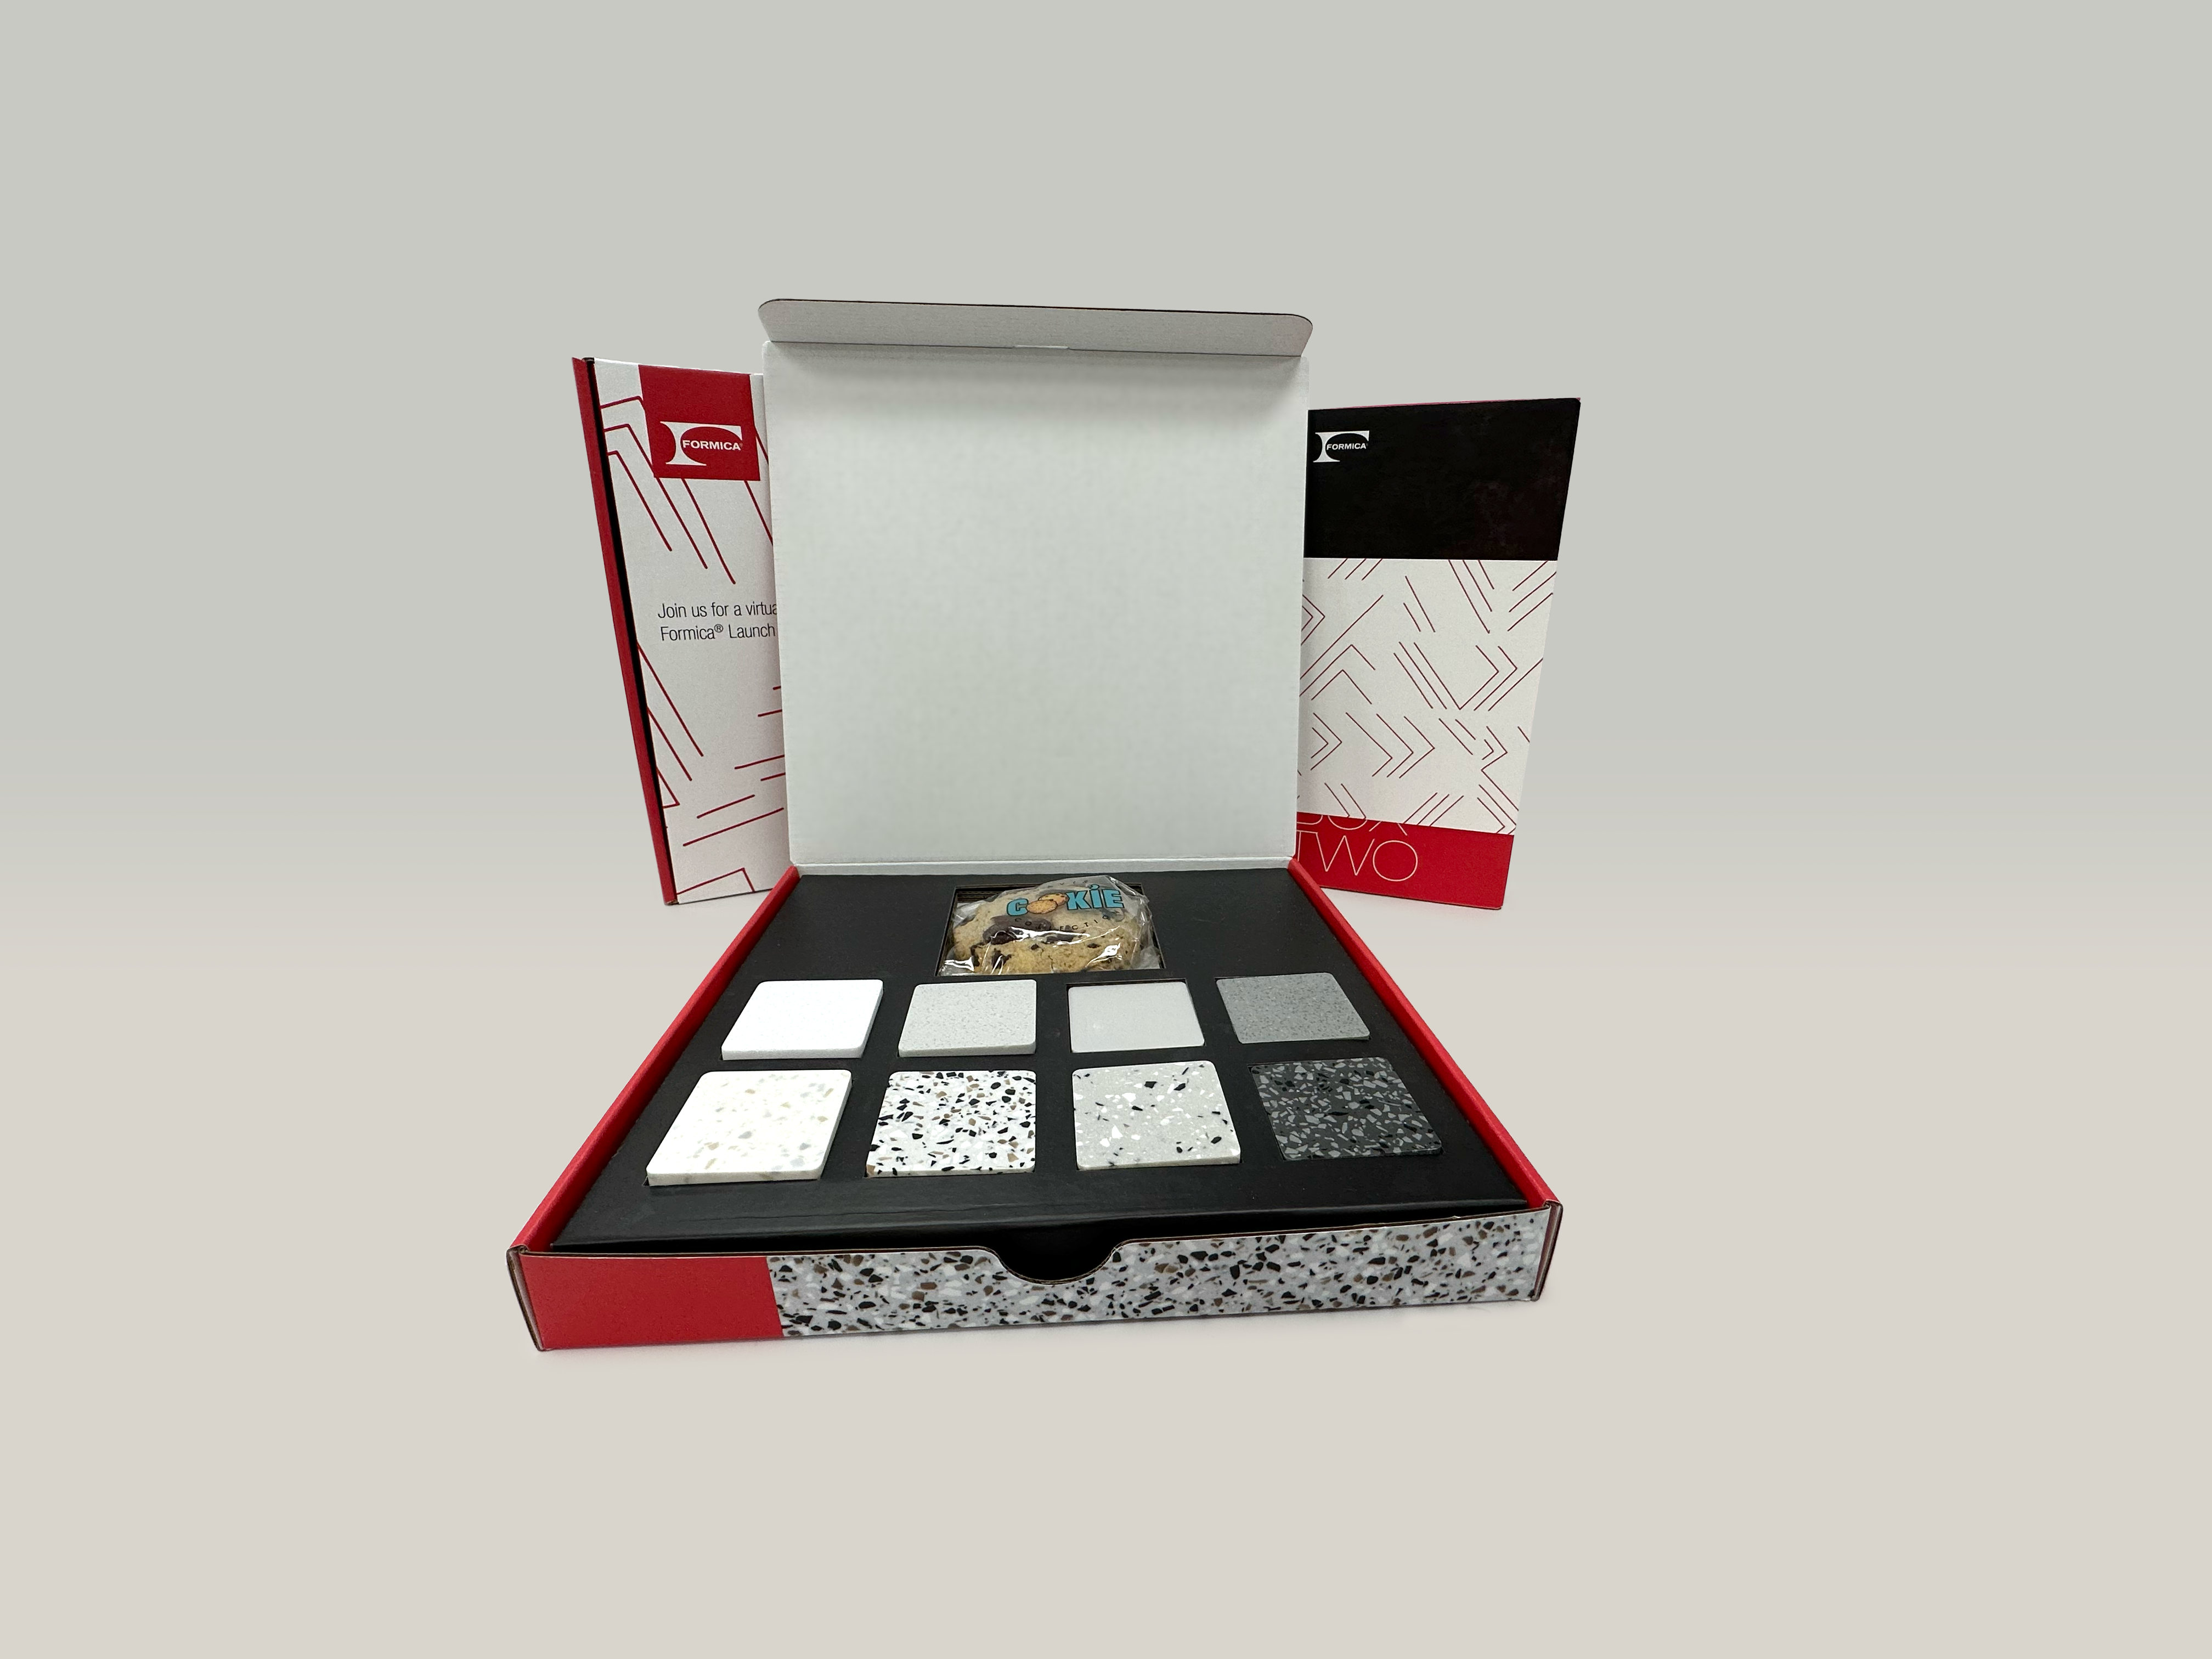 An Image of the Formica Sample Box Kit